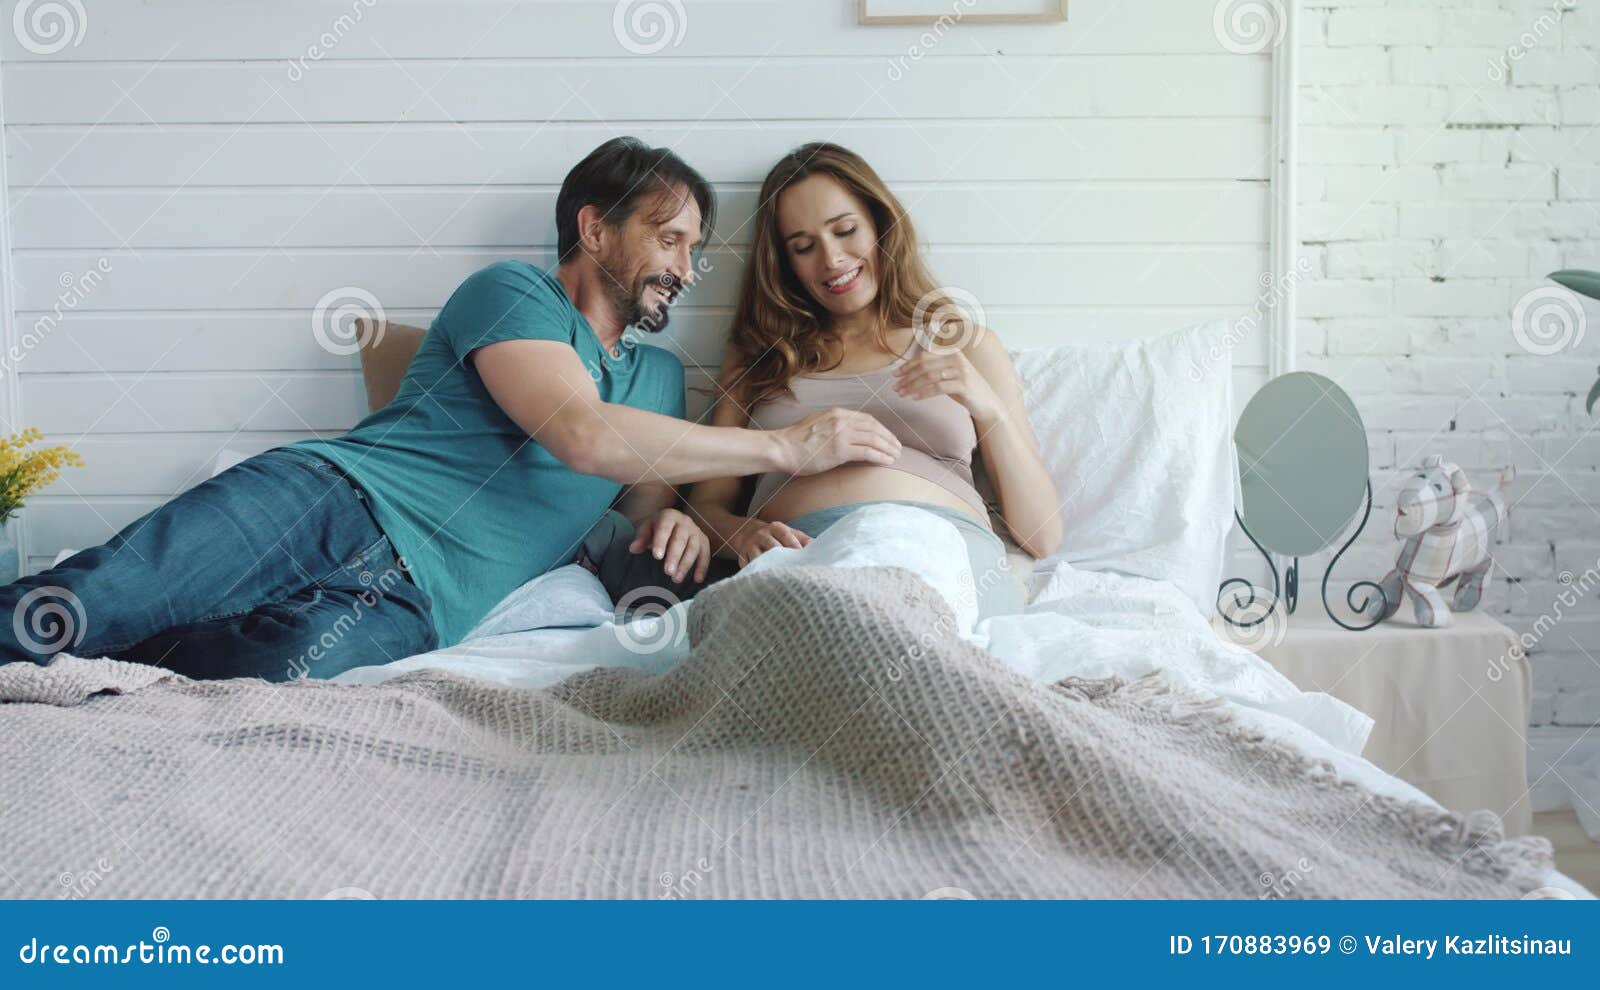 Pregnant Couple Kissing Bed Stock Footage and Videos